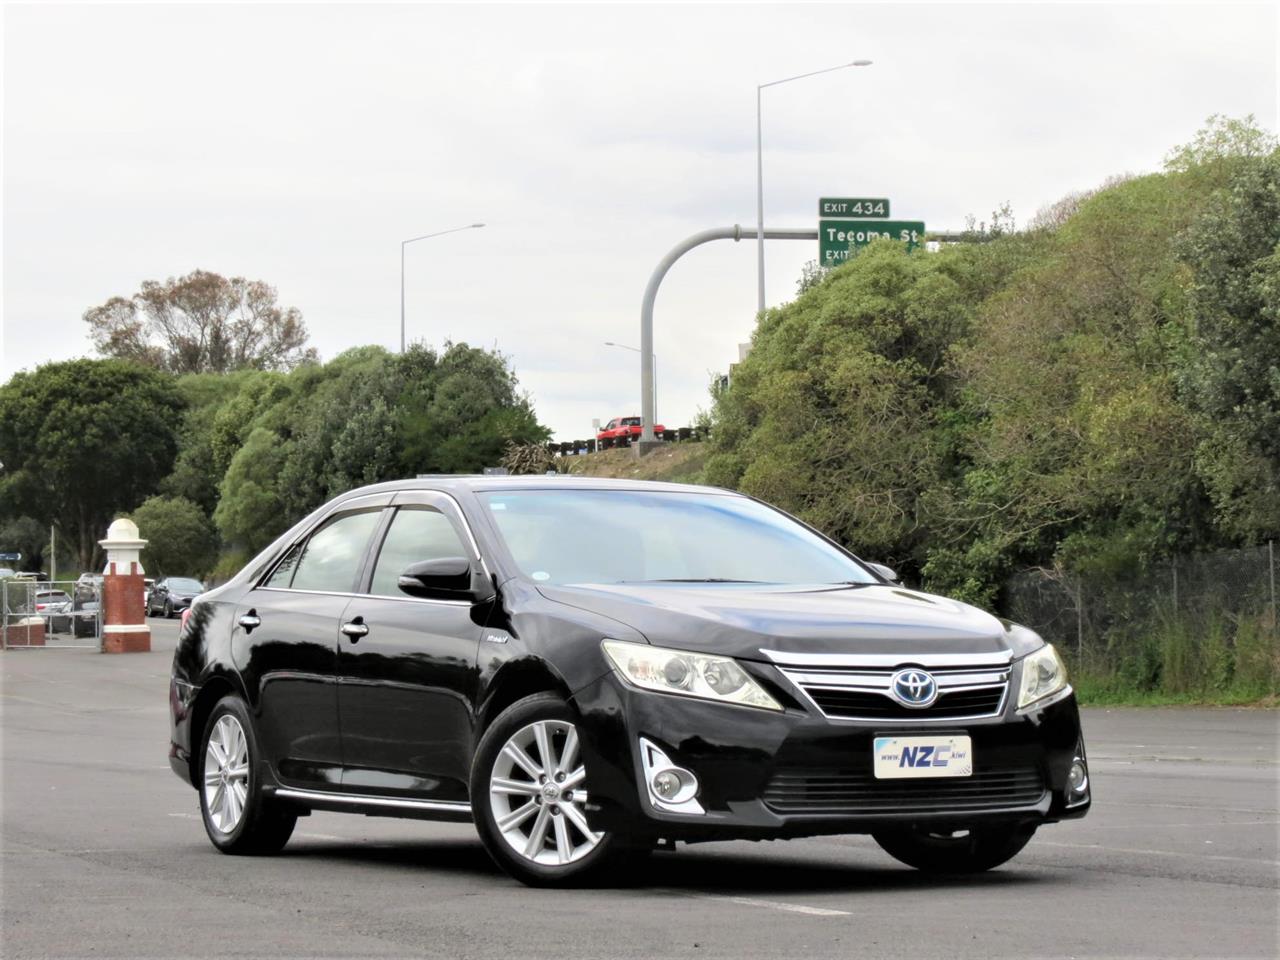 NZC 2012 Toyota Camry just arrived to Auckland